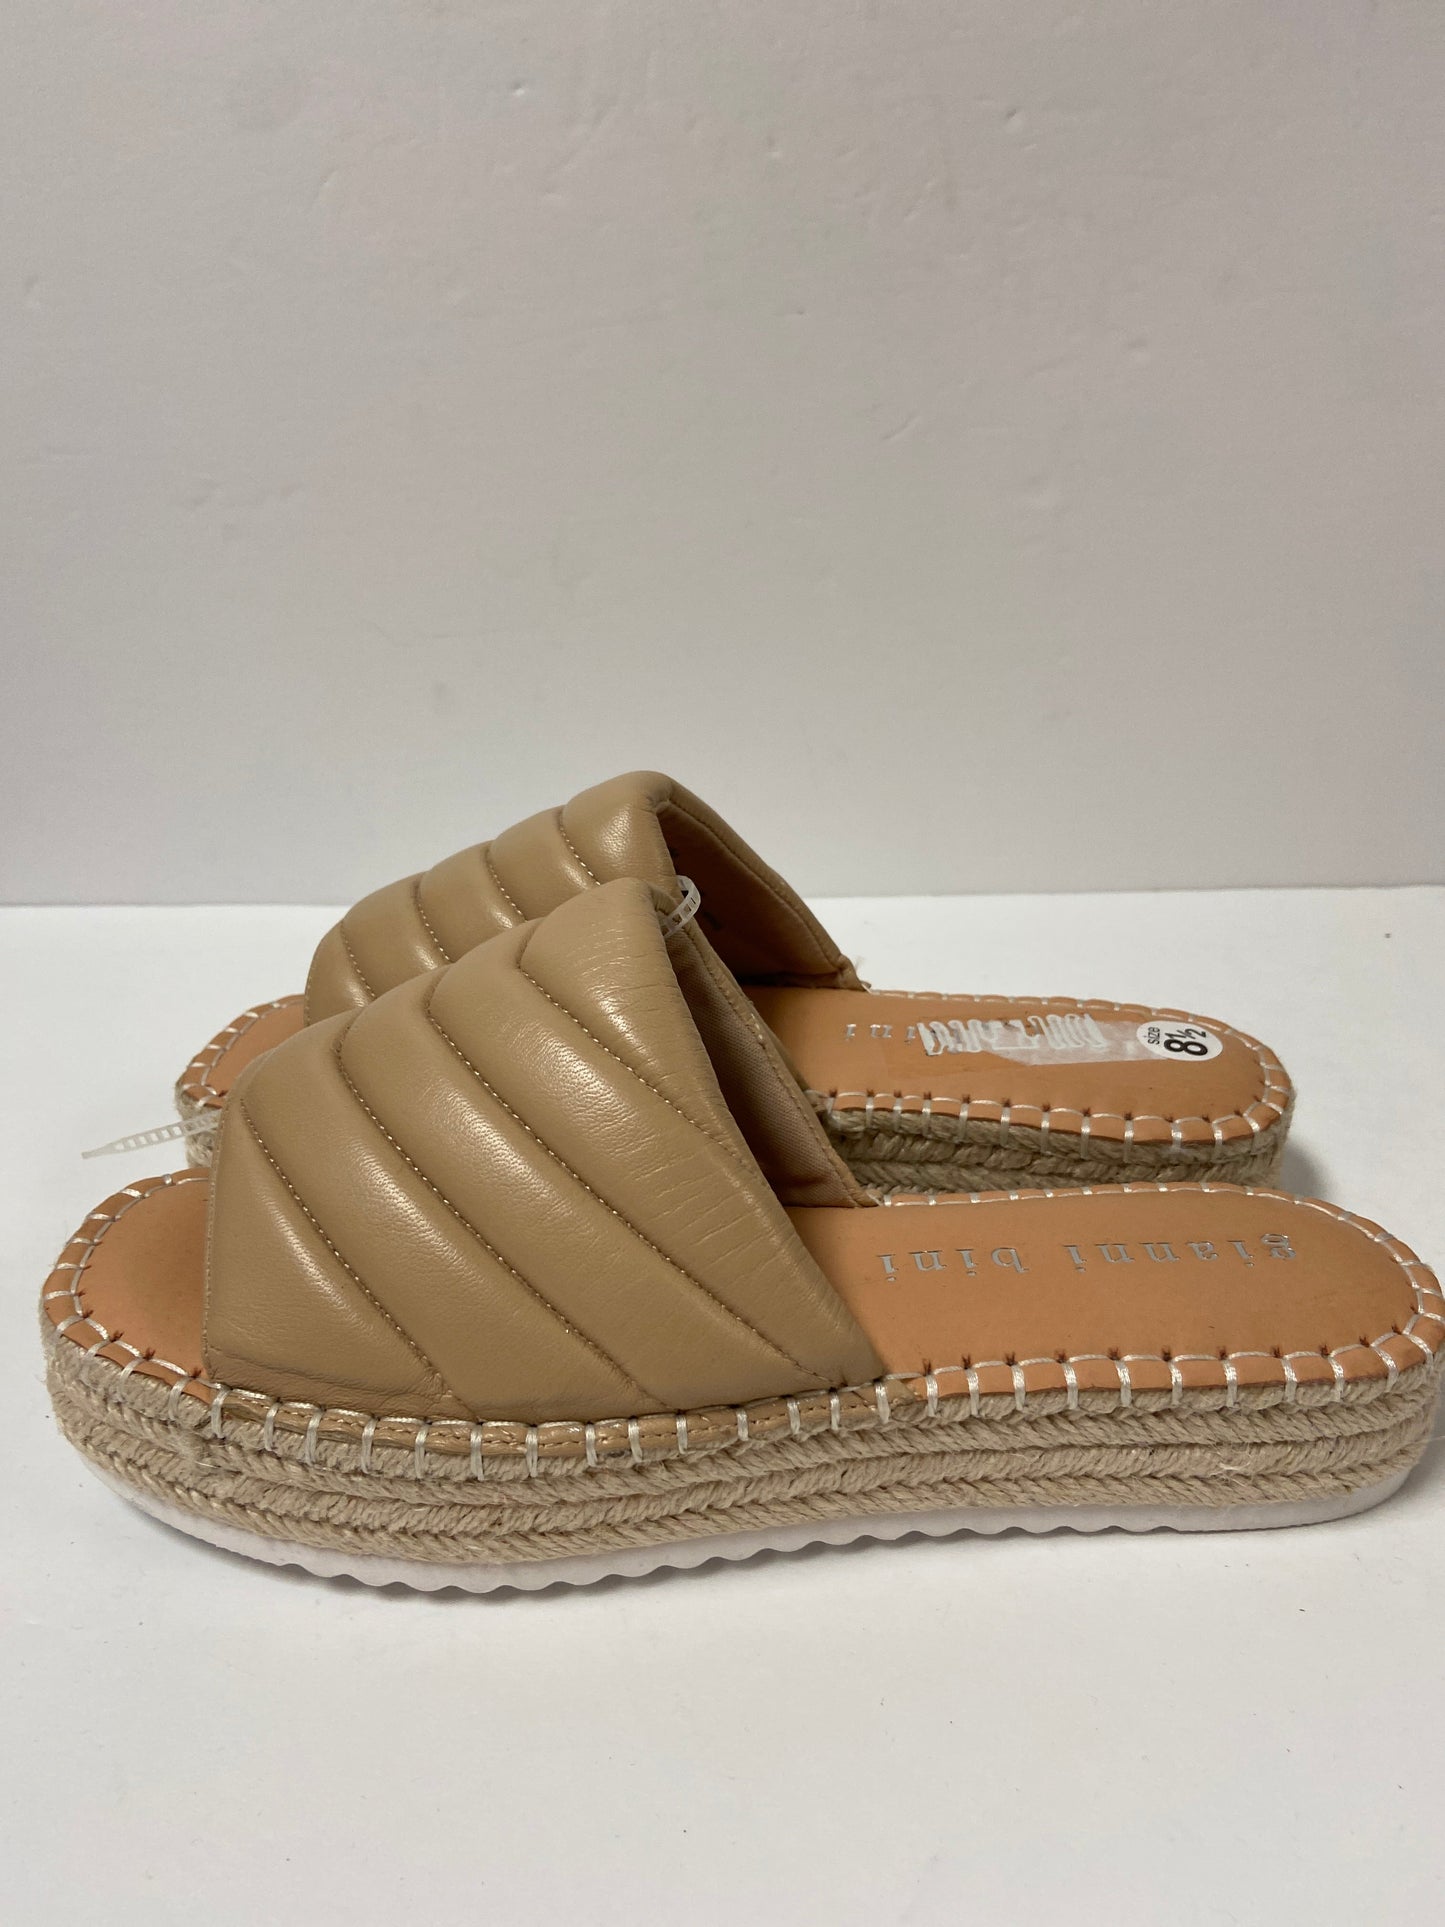 Shoes Flats Espadrille By Gianni Bini  Size: 8.5